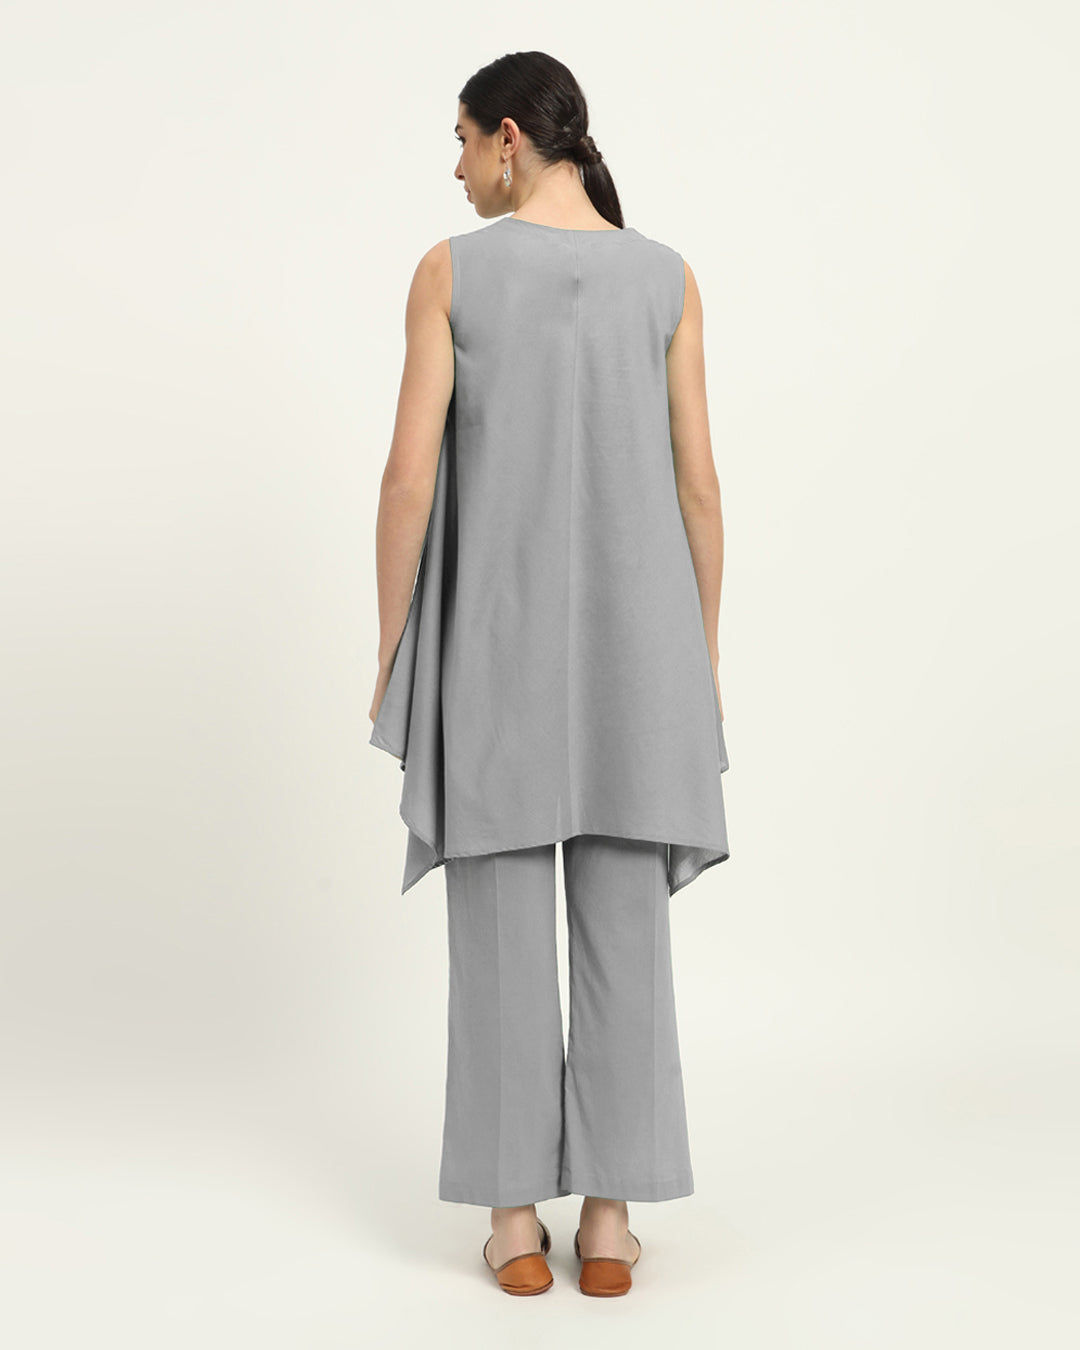 Iced Grey Midsummer Dream Solid Kurta (Without Bottoms)